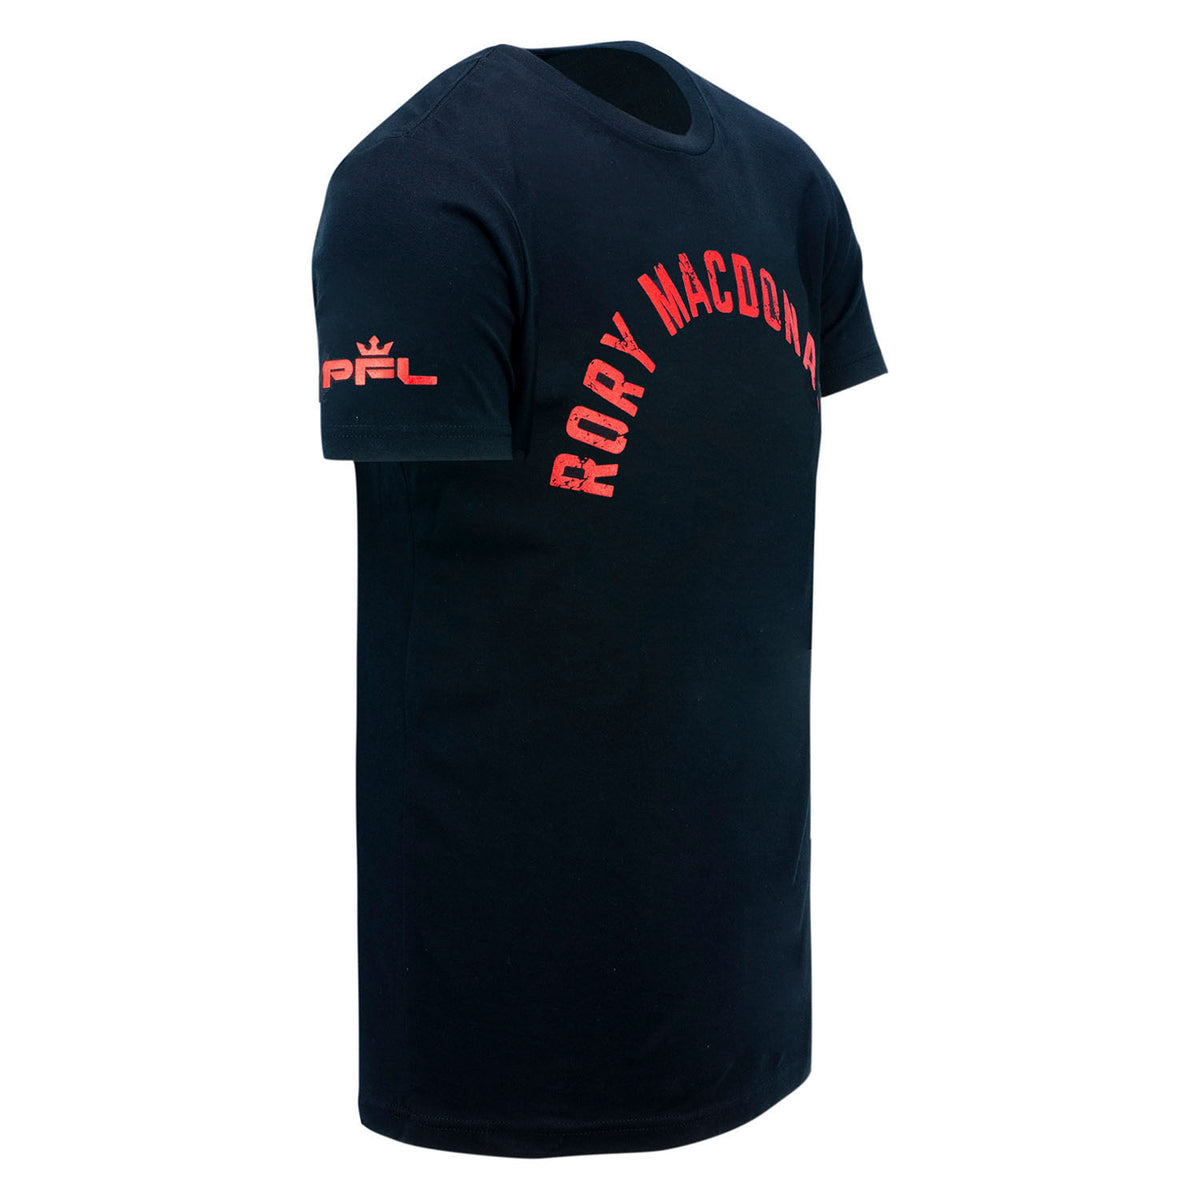 Rory Red King Shirt in Black - Side View